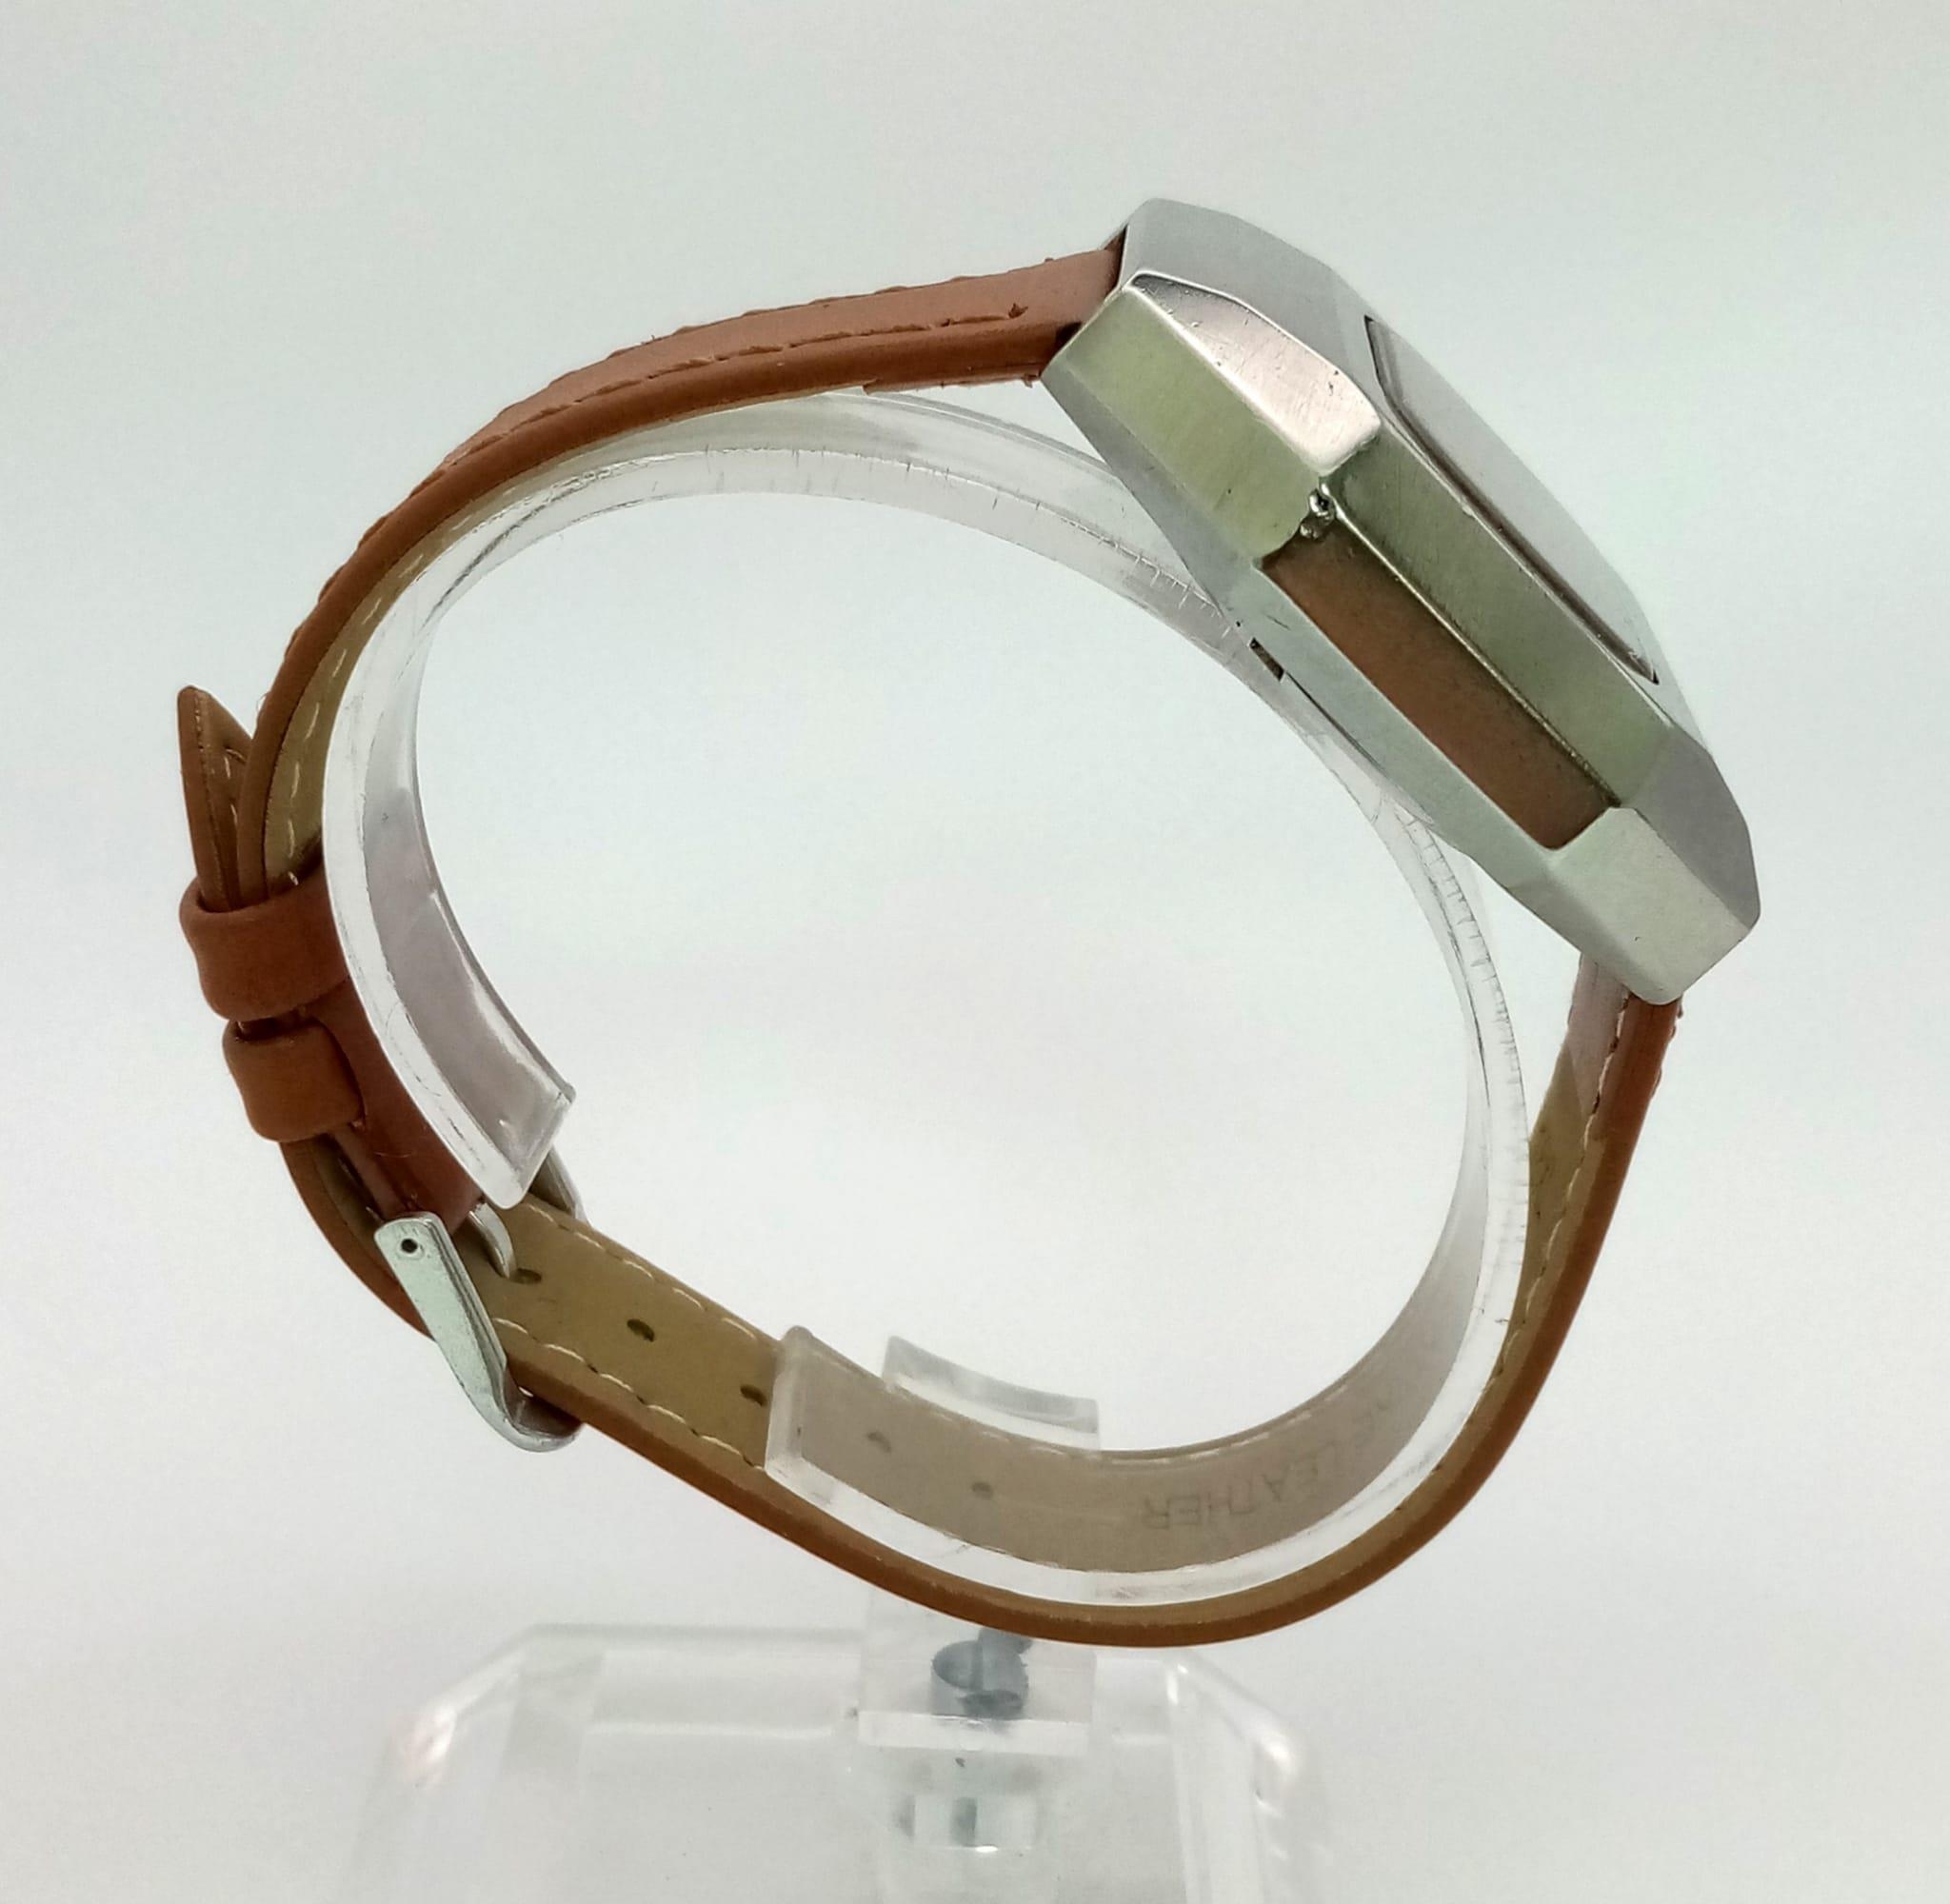 A Rare Vintage Ricoh 21 Jewel Automatic Gents Watch. Brown leather strap. Hexagonal steel case - - Image 4 of 5